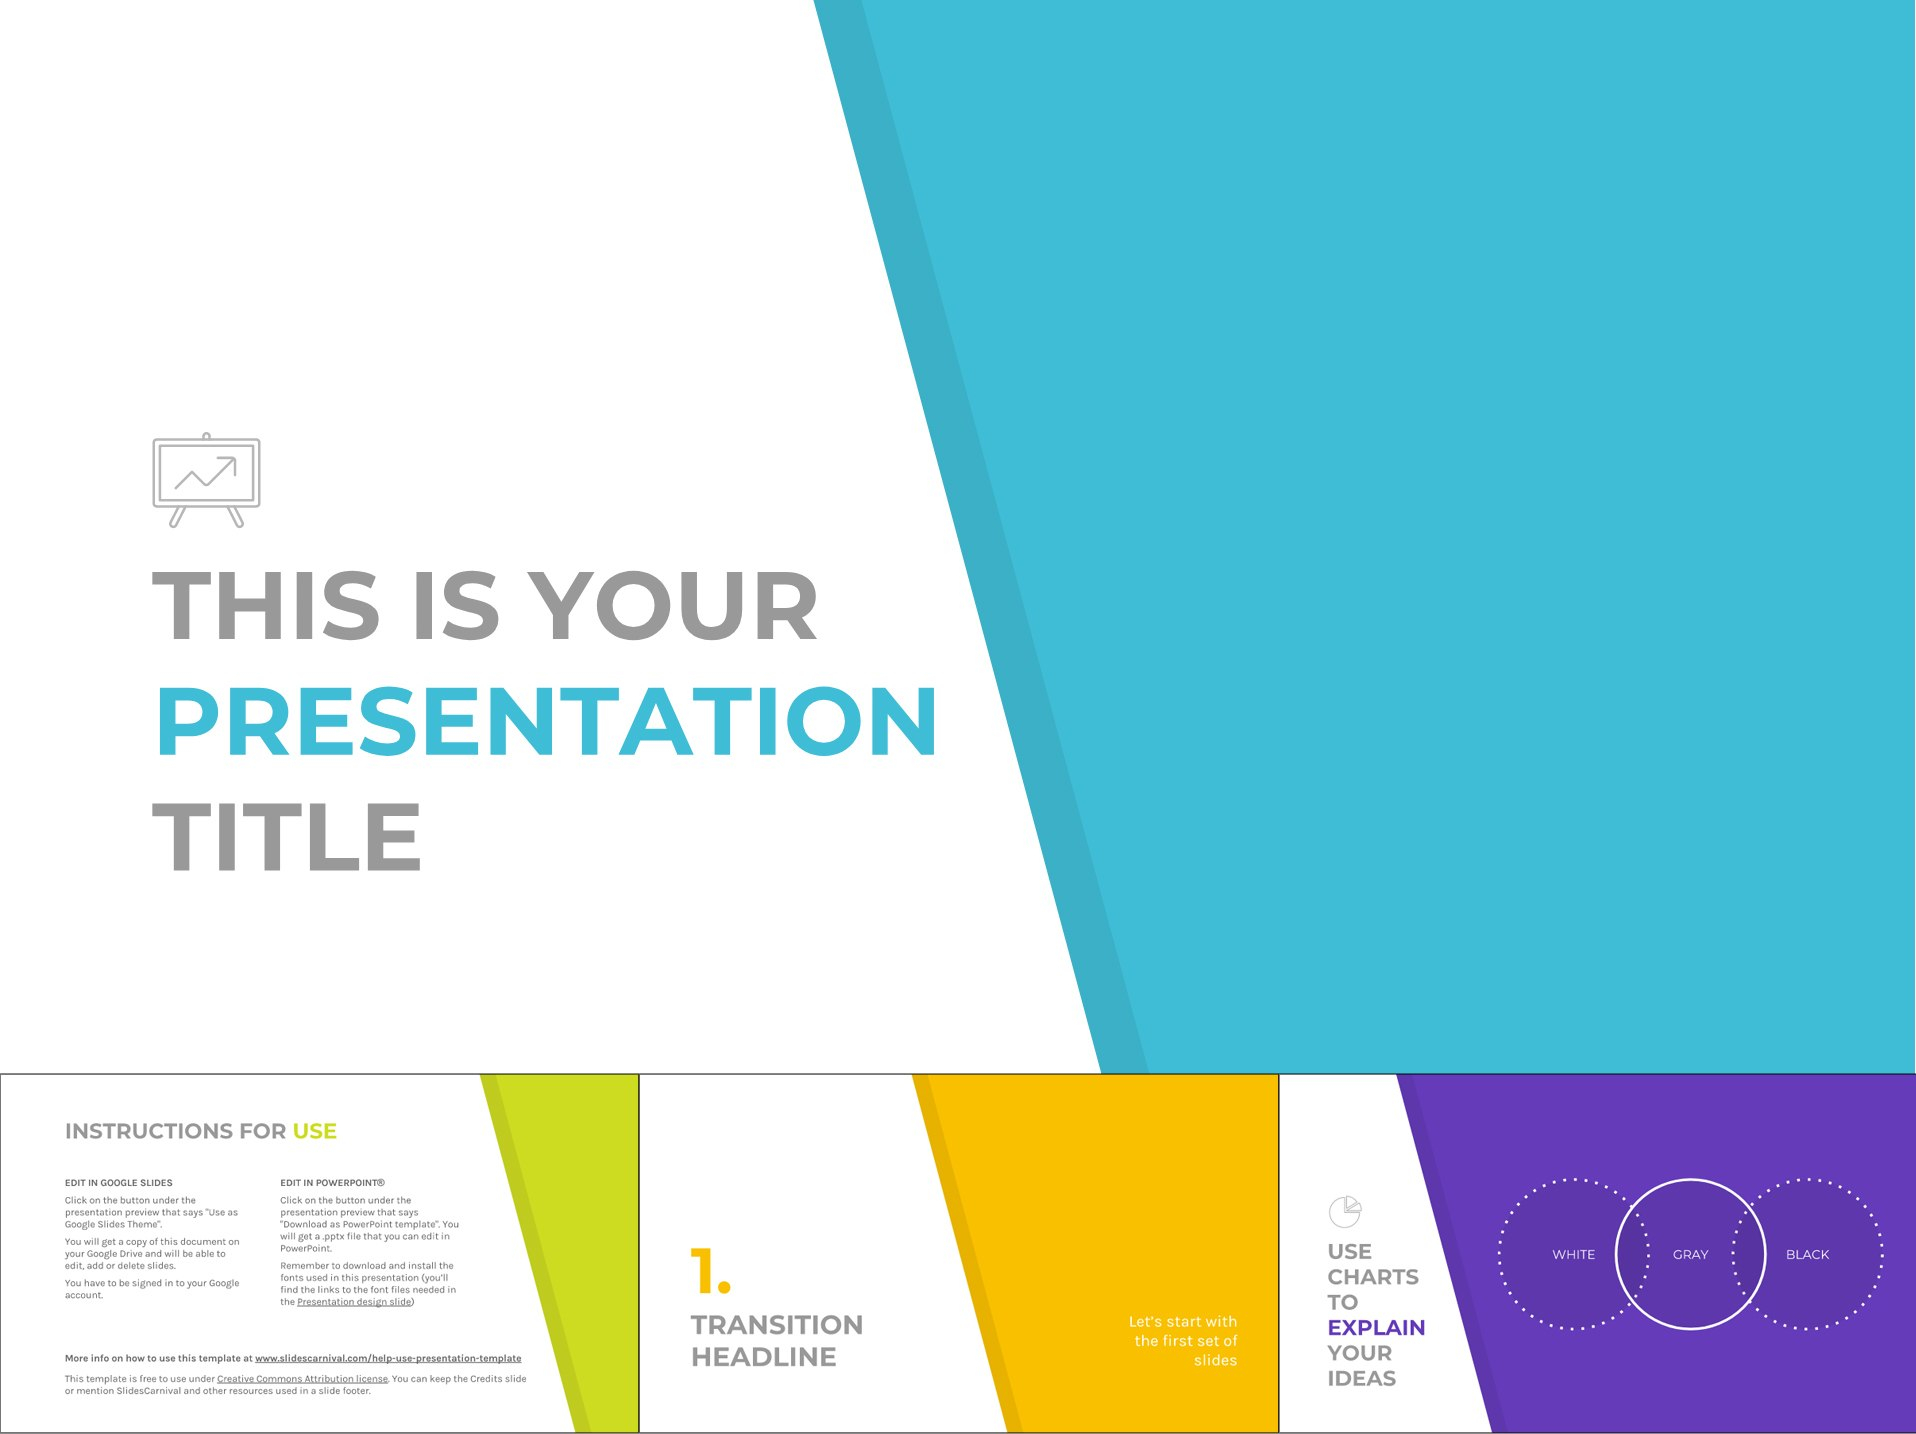 Free Google Slides Templates For Your Next Presentation for Google Drive Presentation Templates